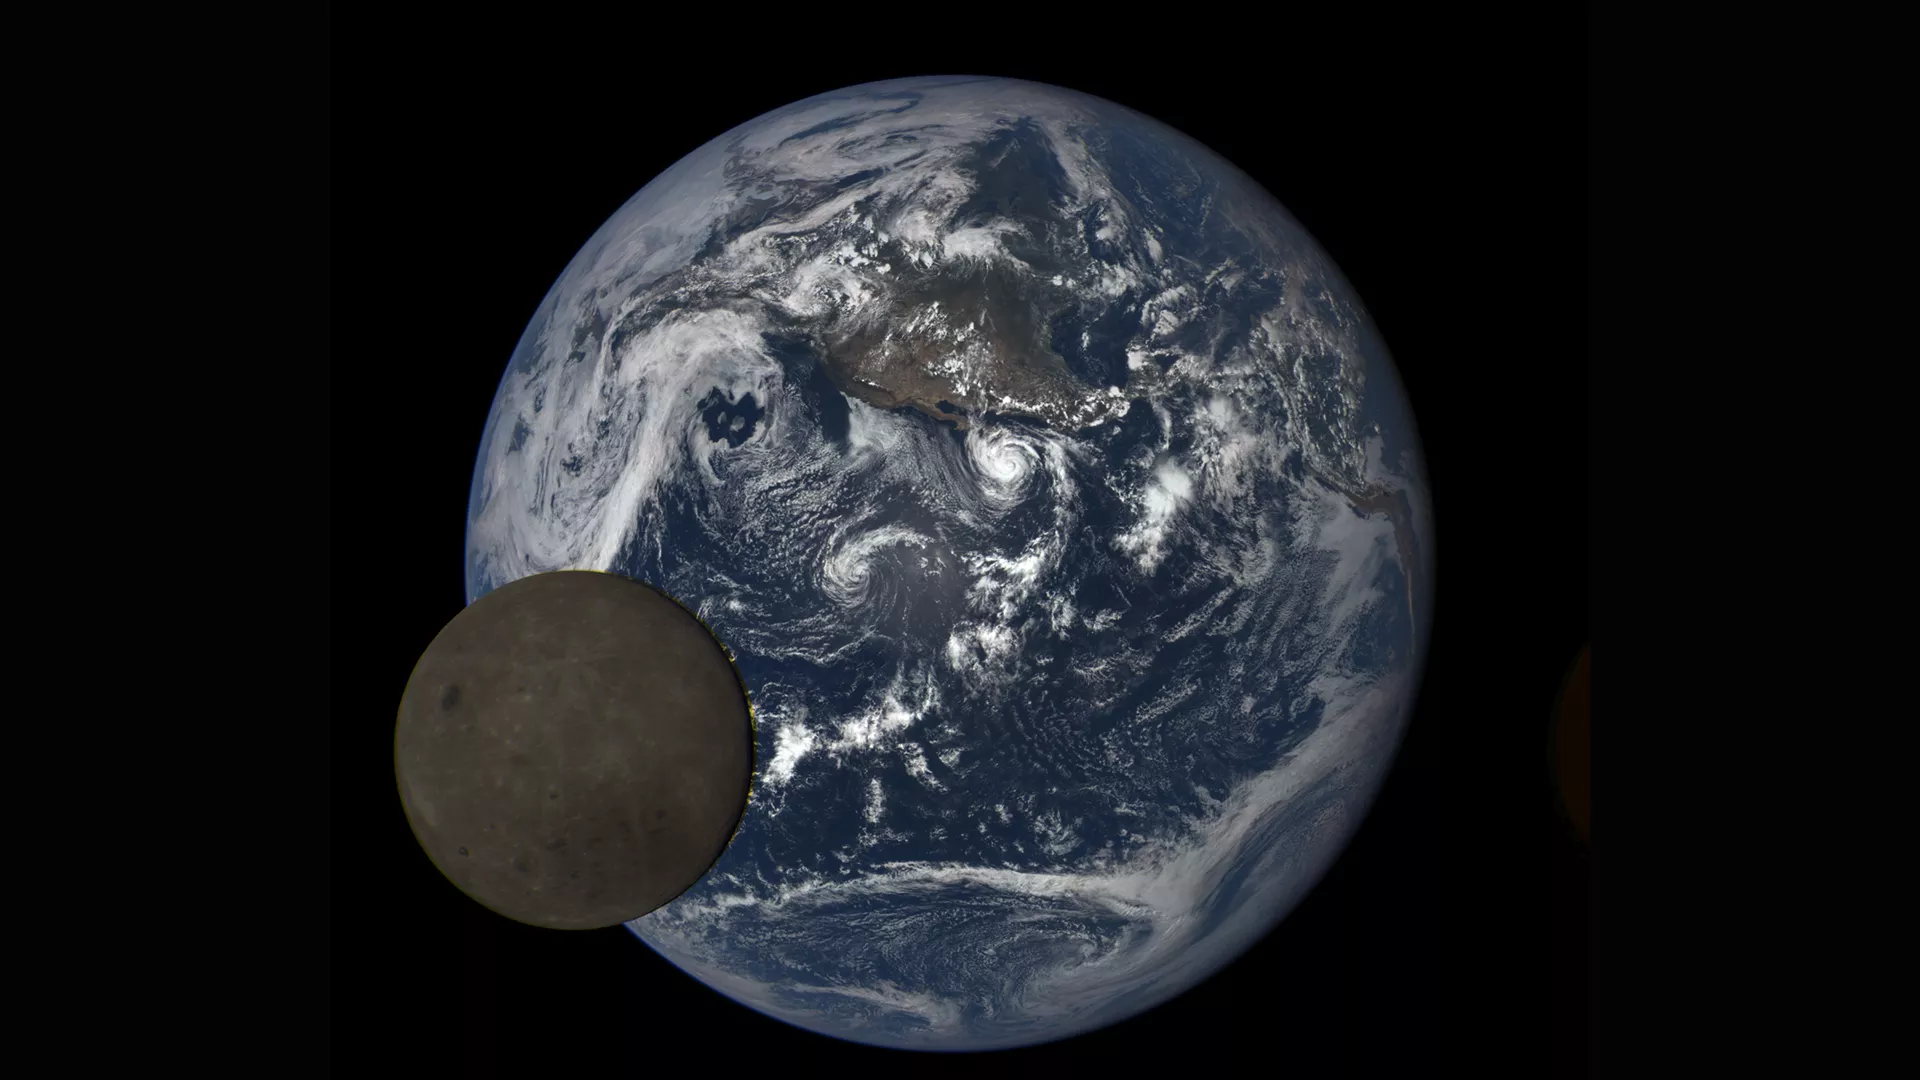 Image of the earth and mood